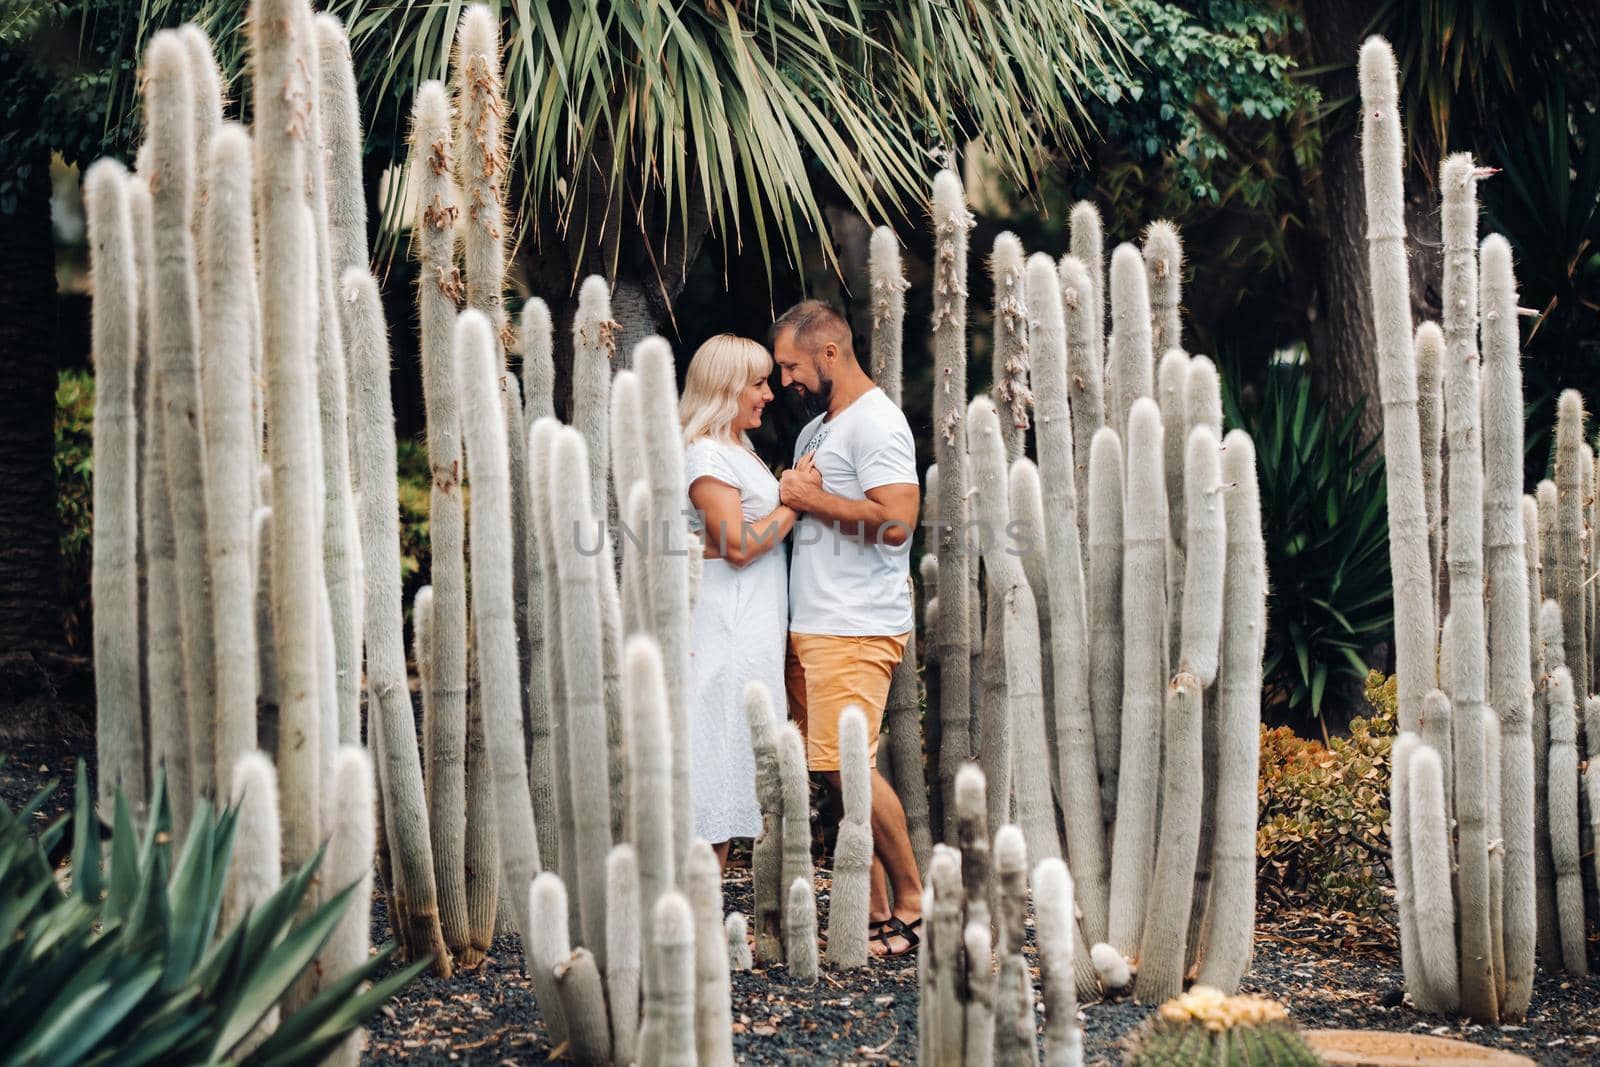 A loving couple embraces against the backdrop of huge cacti on the island of Tenerife.People in love in the Canary Islands.Large cacti in Tenerife by Lobachad